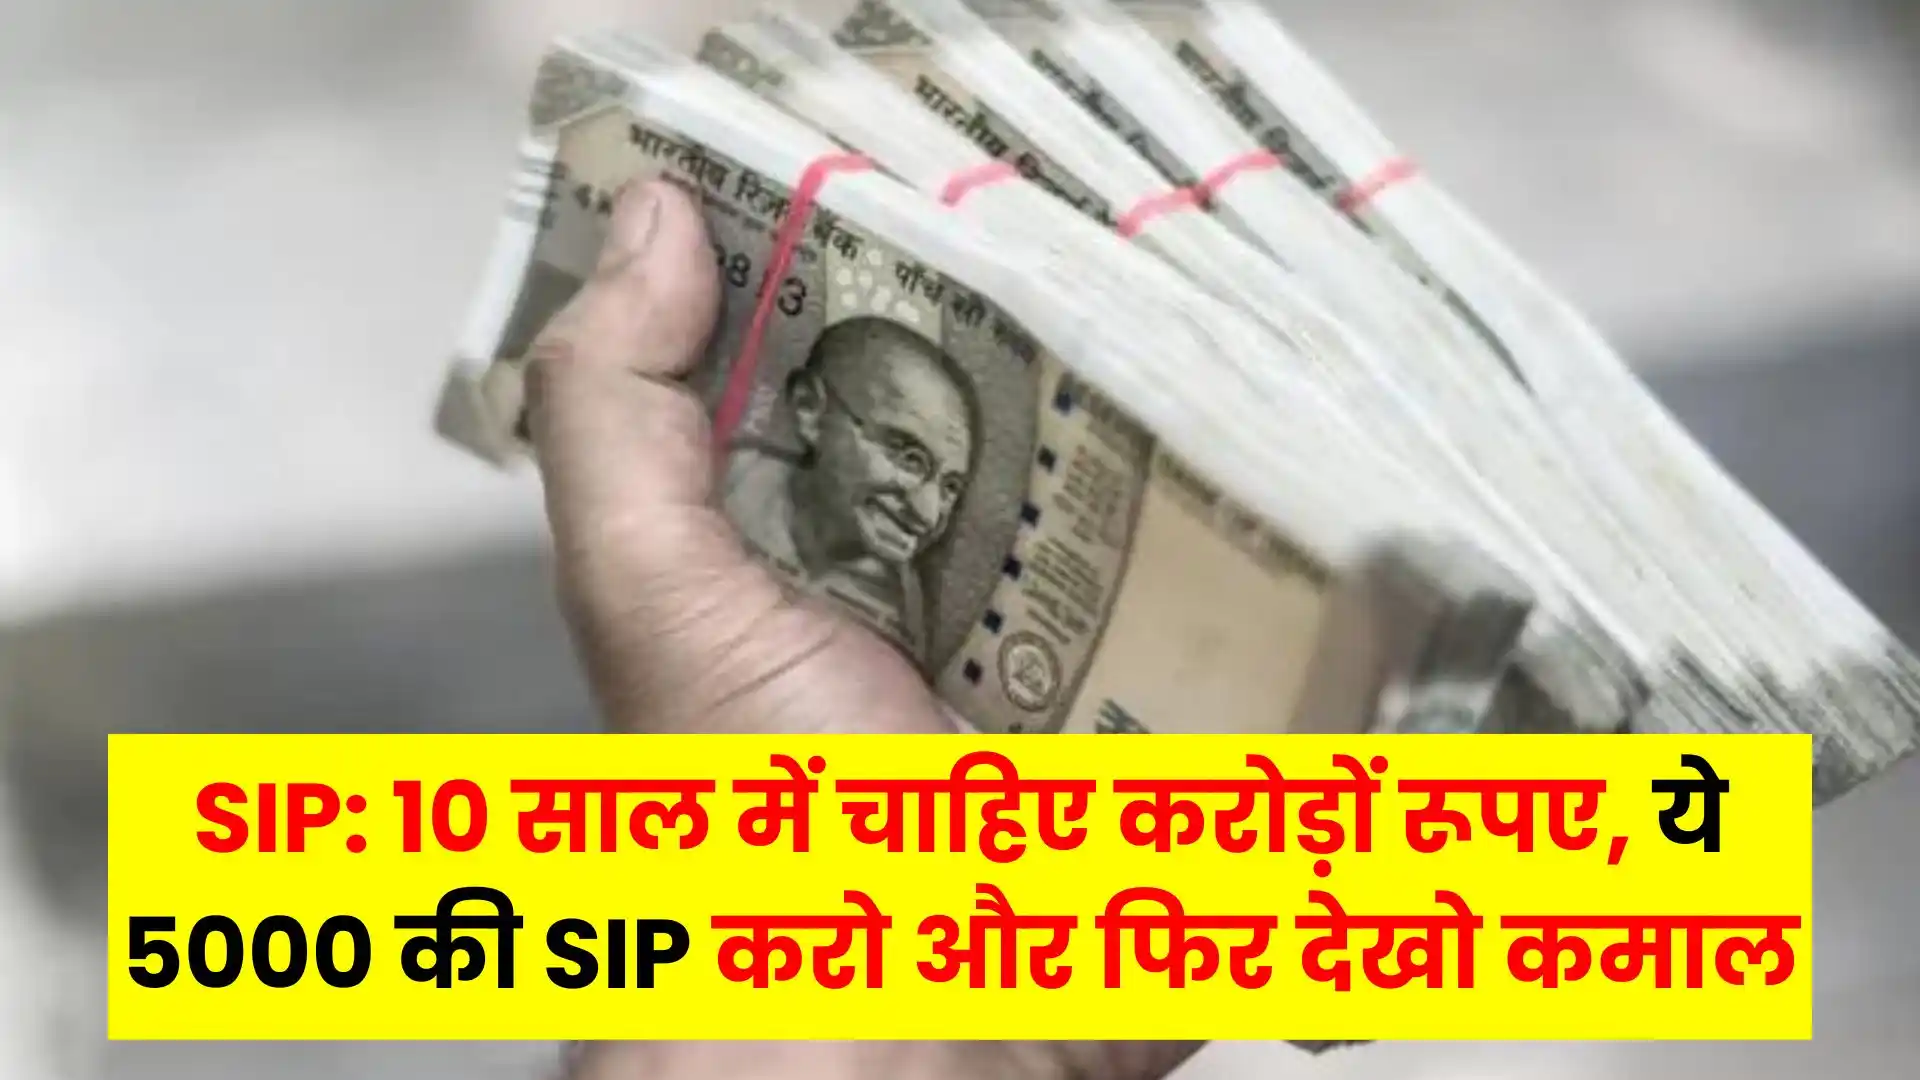 SIP Need crores of rupees in 10 years, do this SIP of Rs 5000 and then see the wonders.